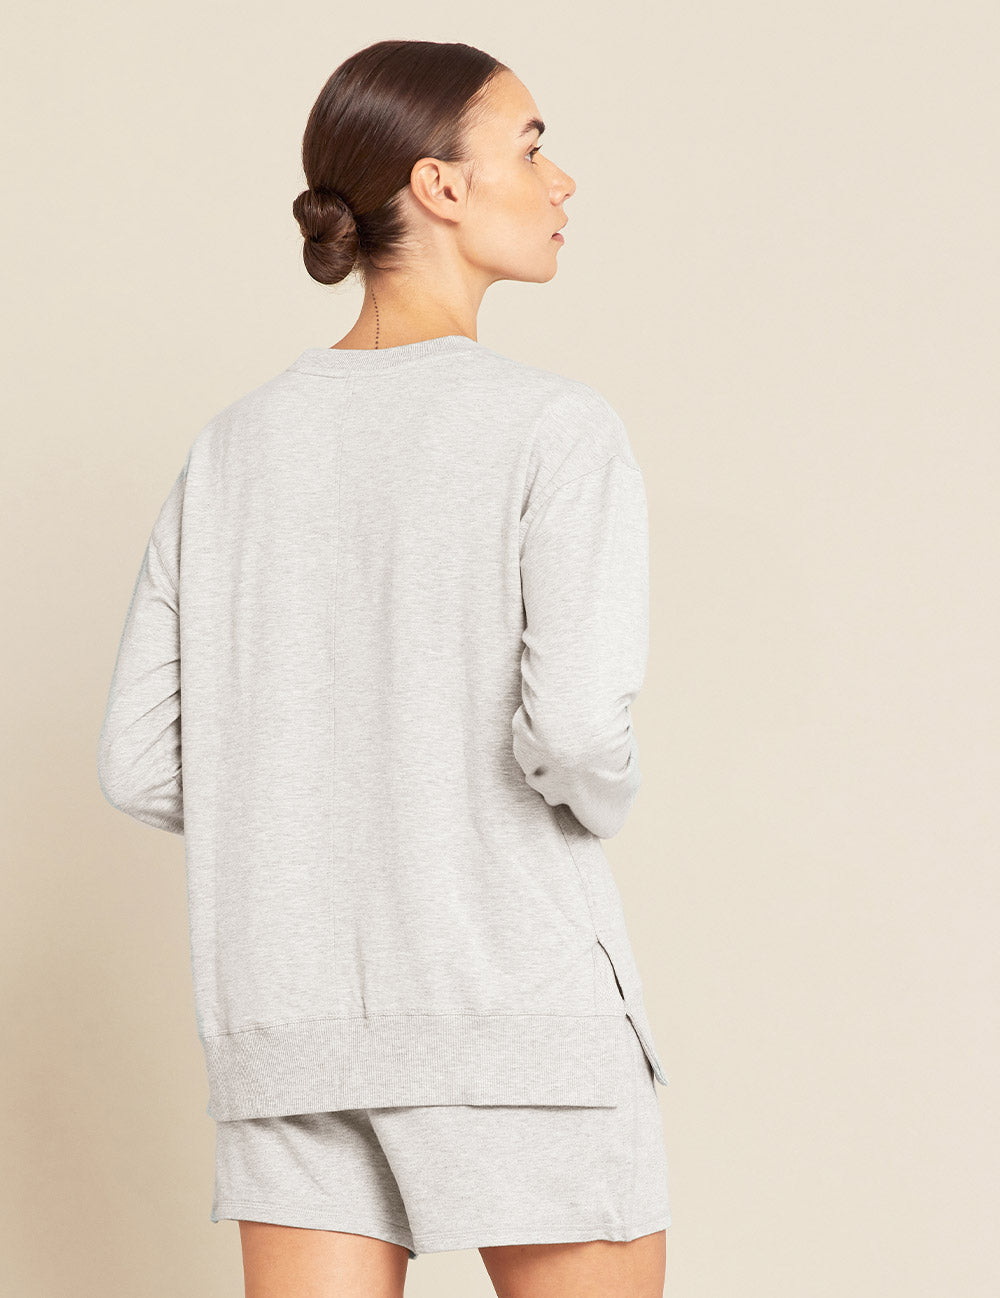 Boody Bamboo Womens Crew Pullover Sweater in Light Grey Marl Back View